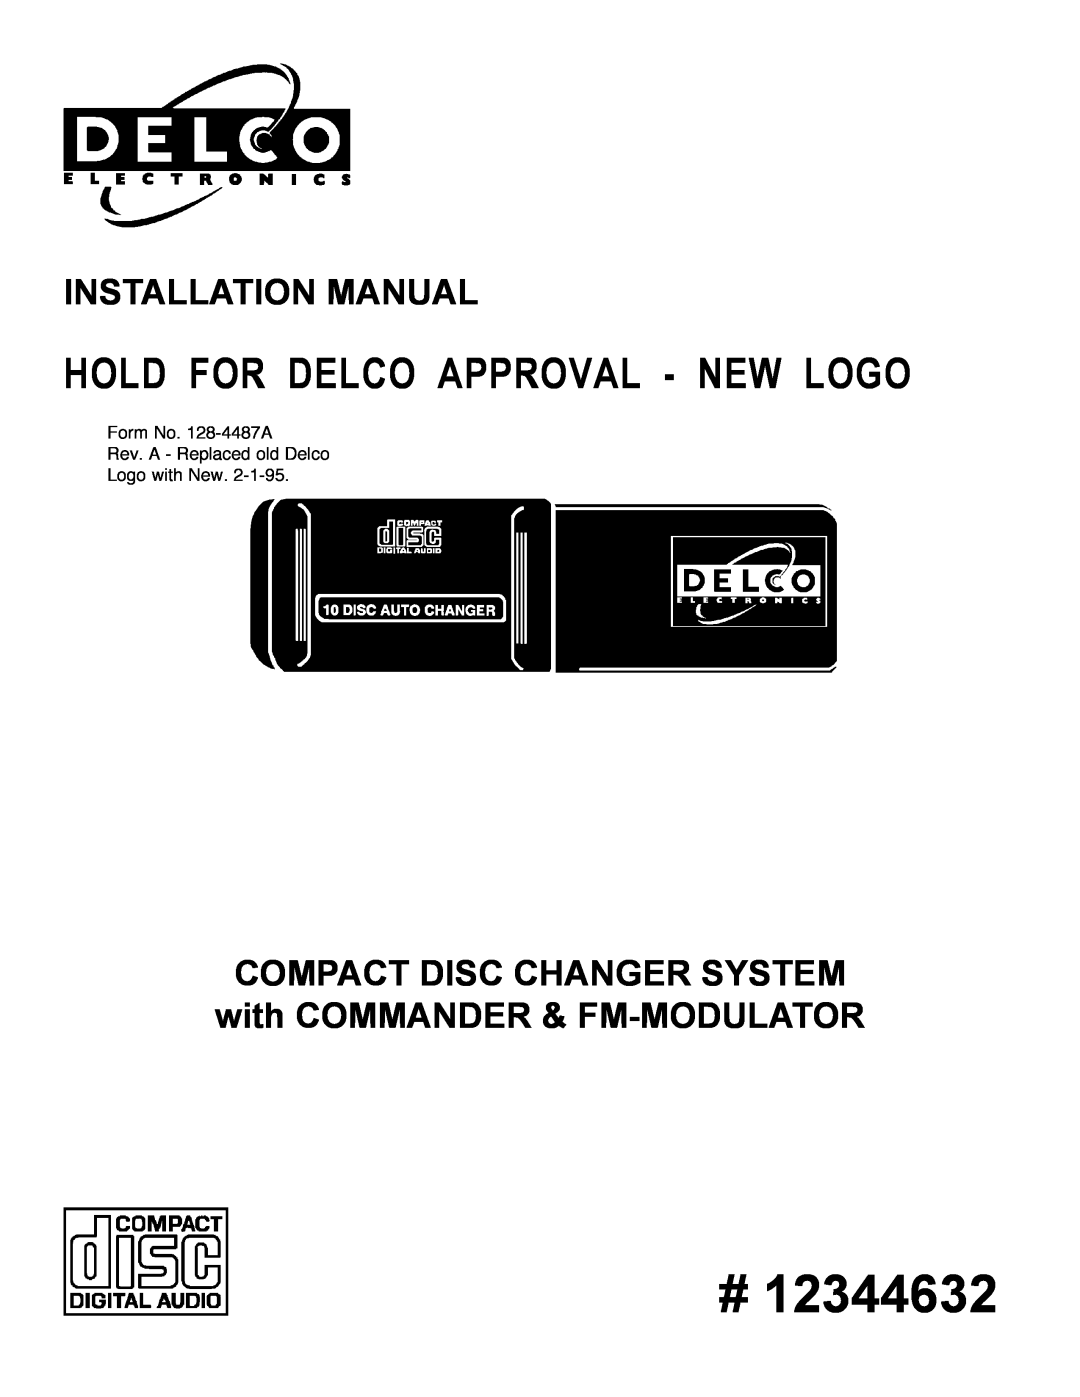 Shopsmith none installation manual Hold For Delco Approval - New Logo, Installation Manual 